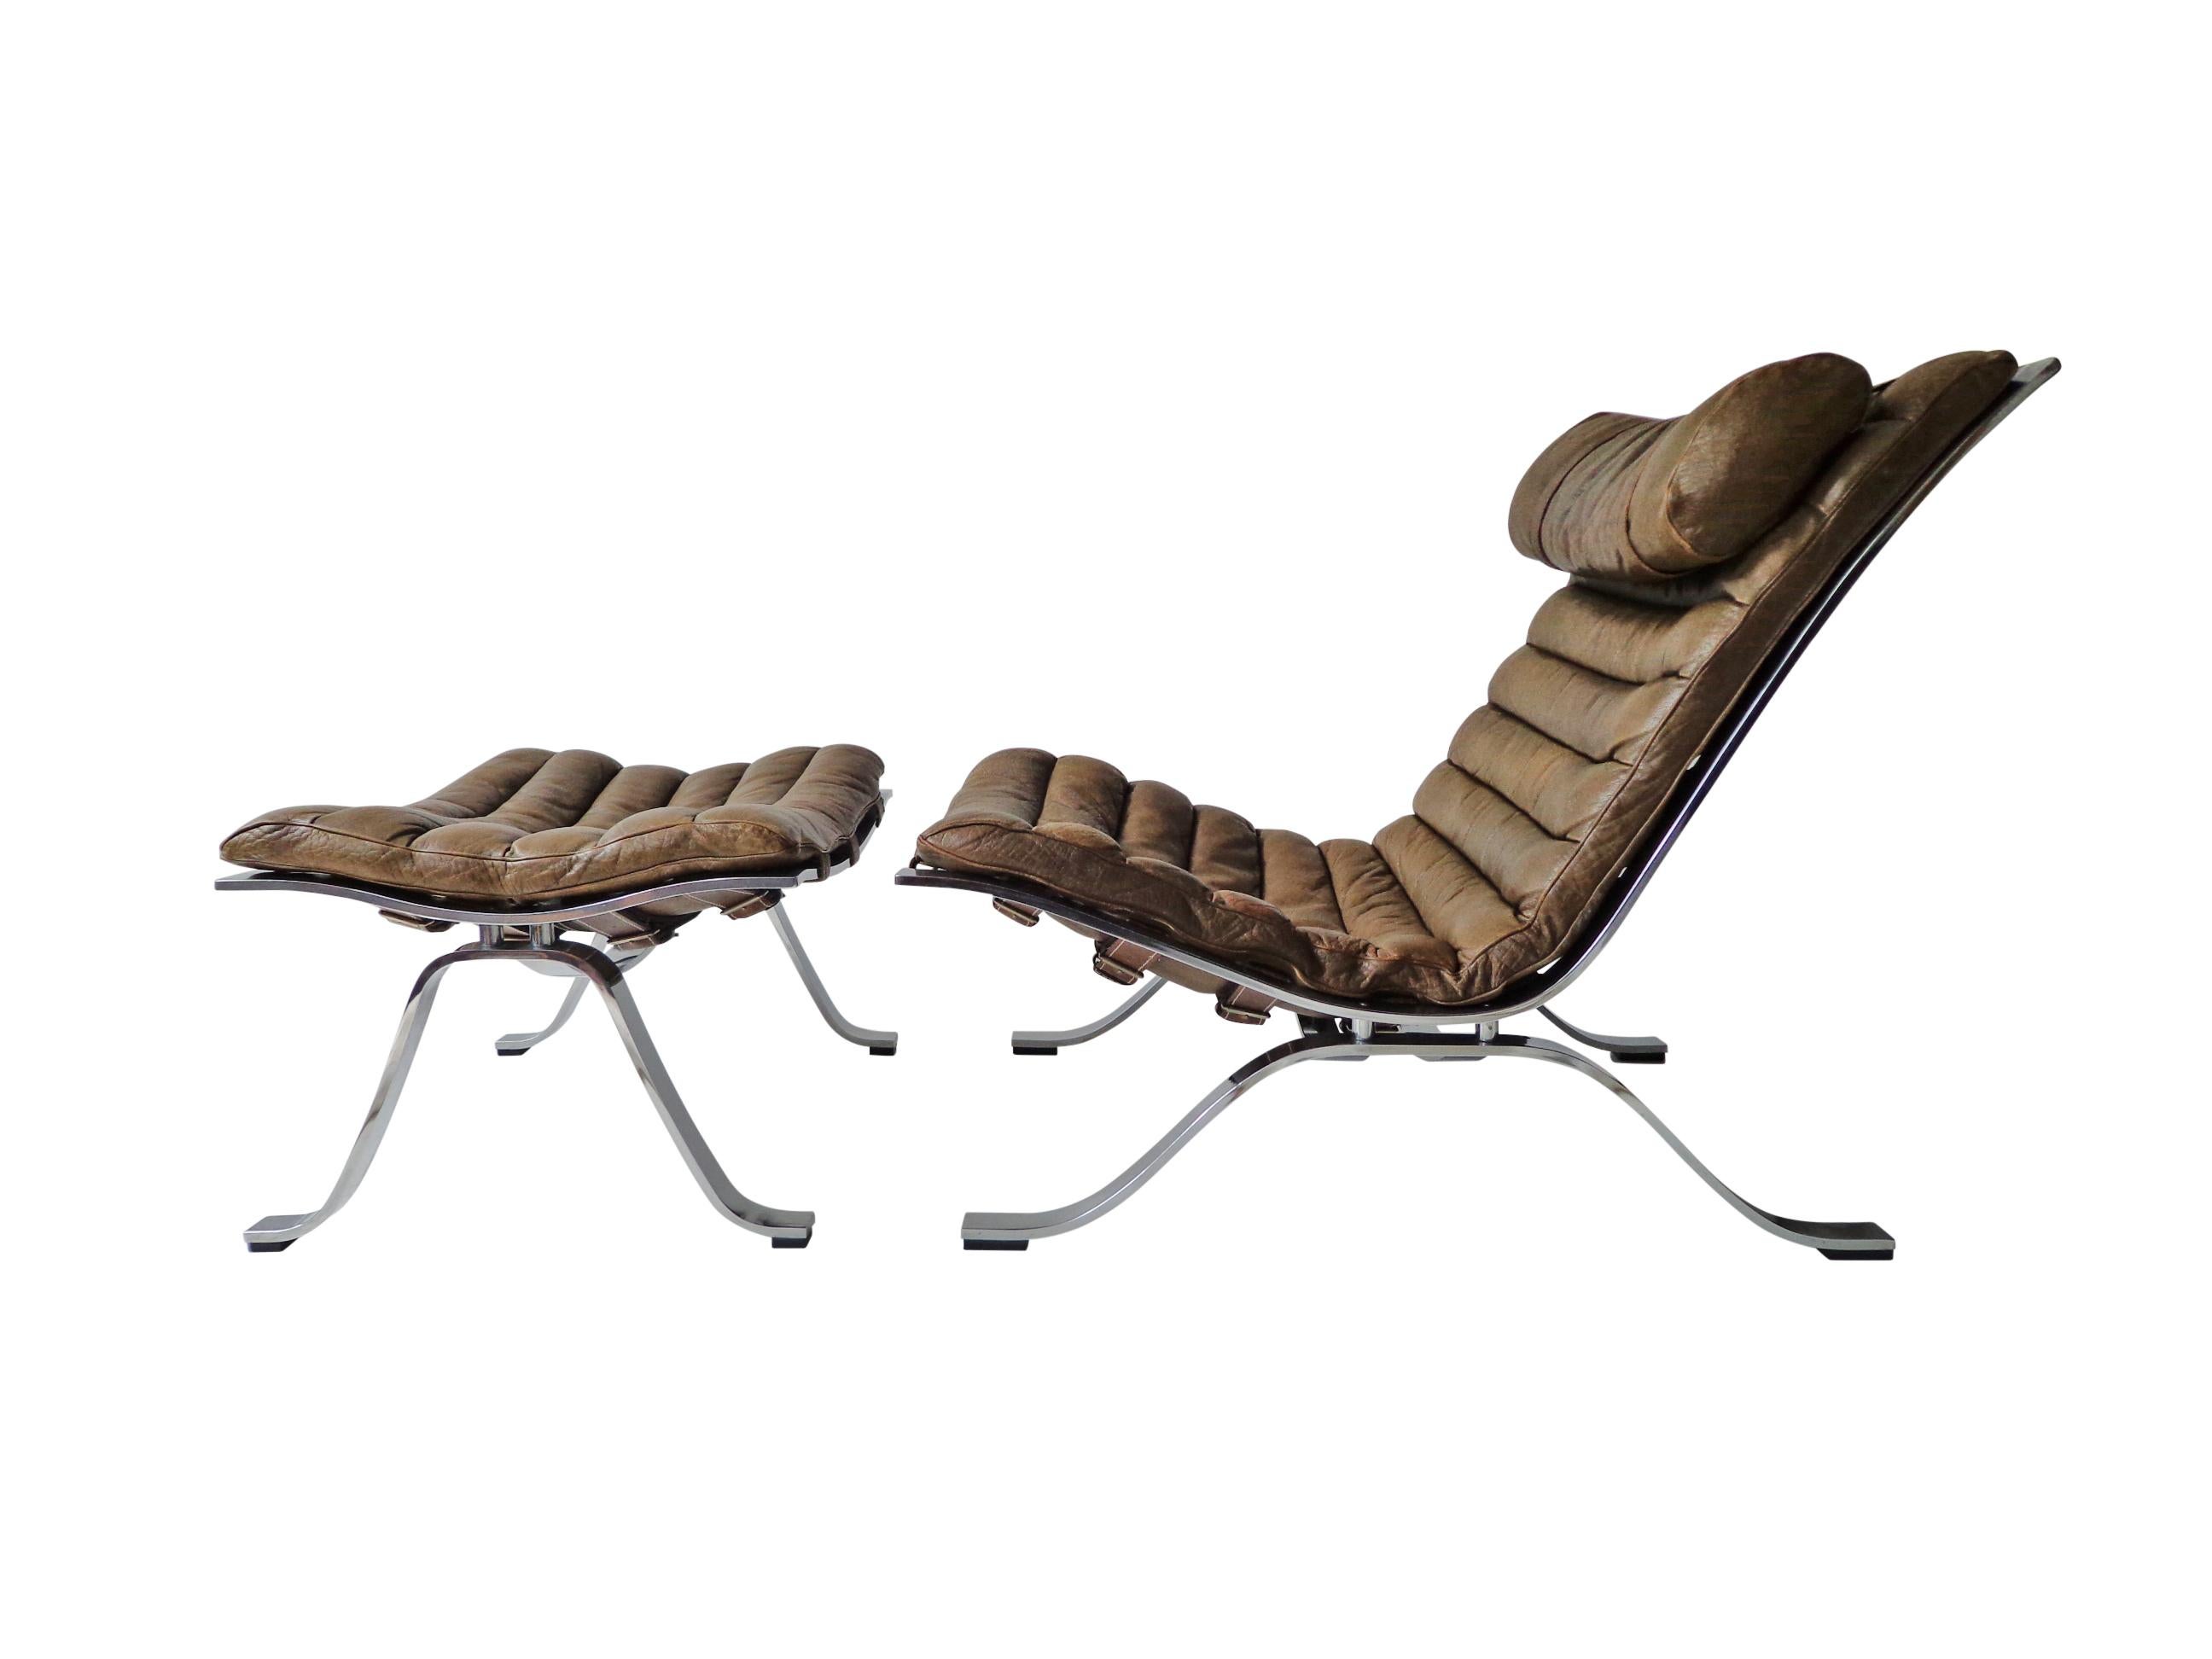 Arne Norell ‘Ari’ Lounge Chair and Ottoman in Original Cognac/Brown Leather In Good Condition For Sale In Amsterdam, NL